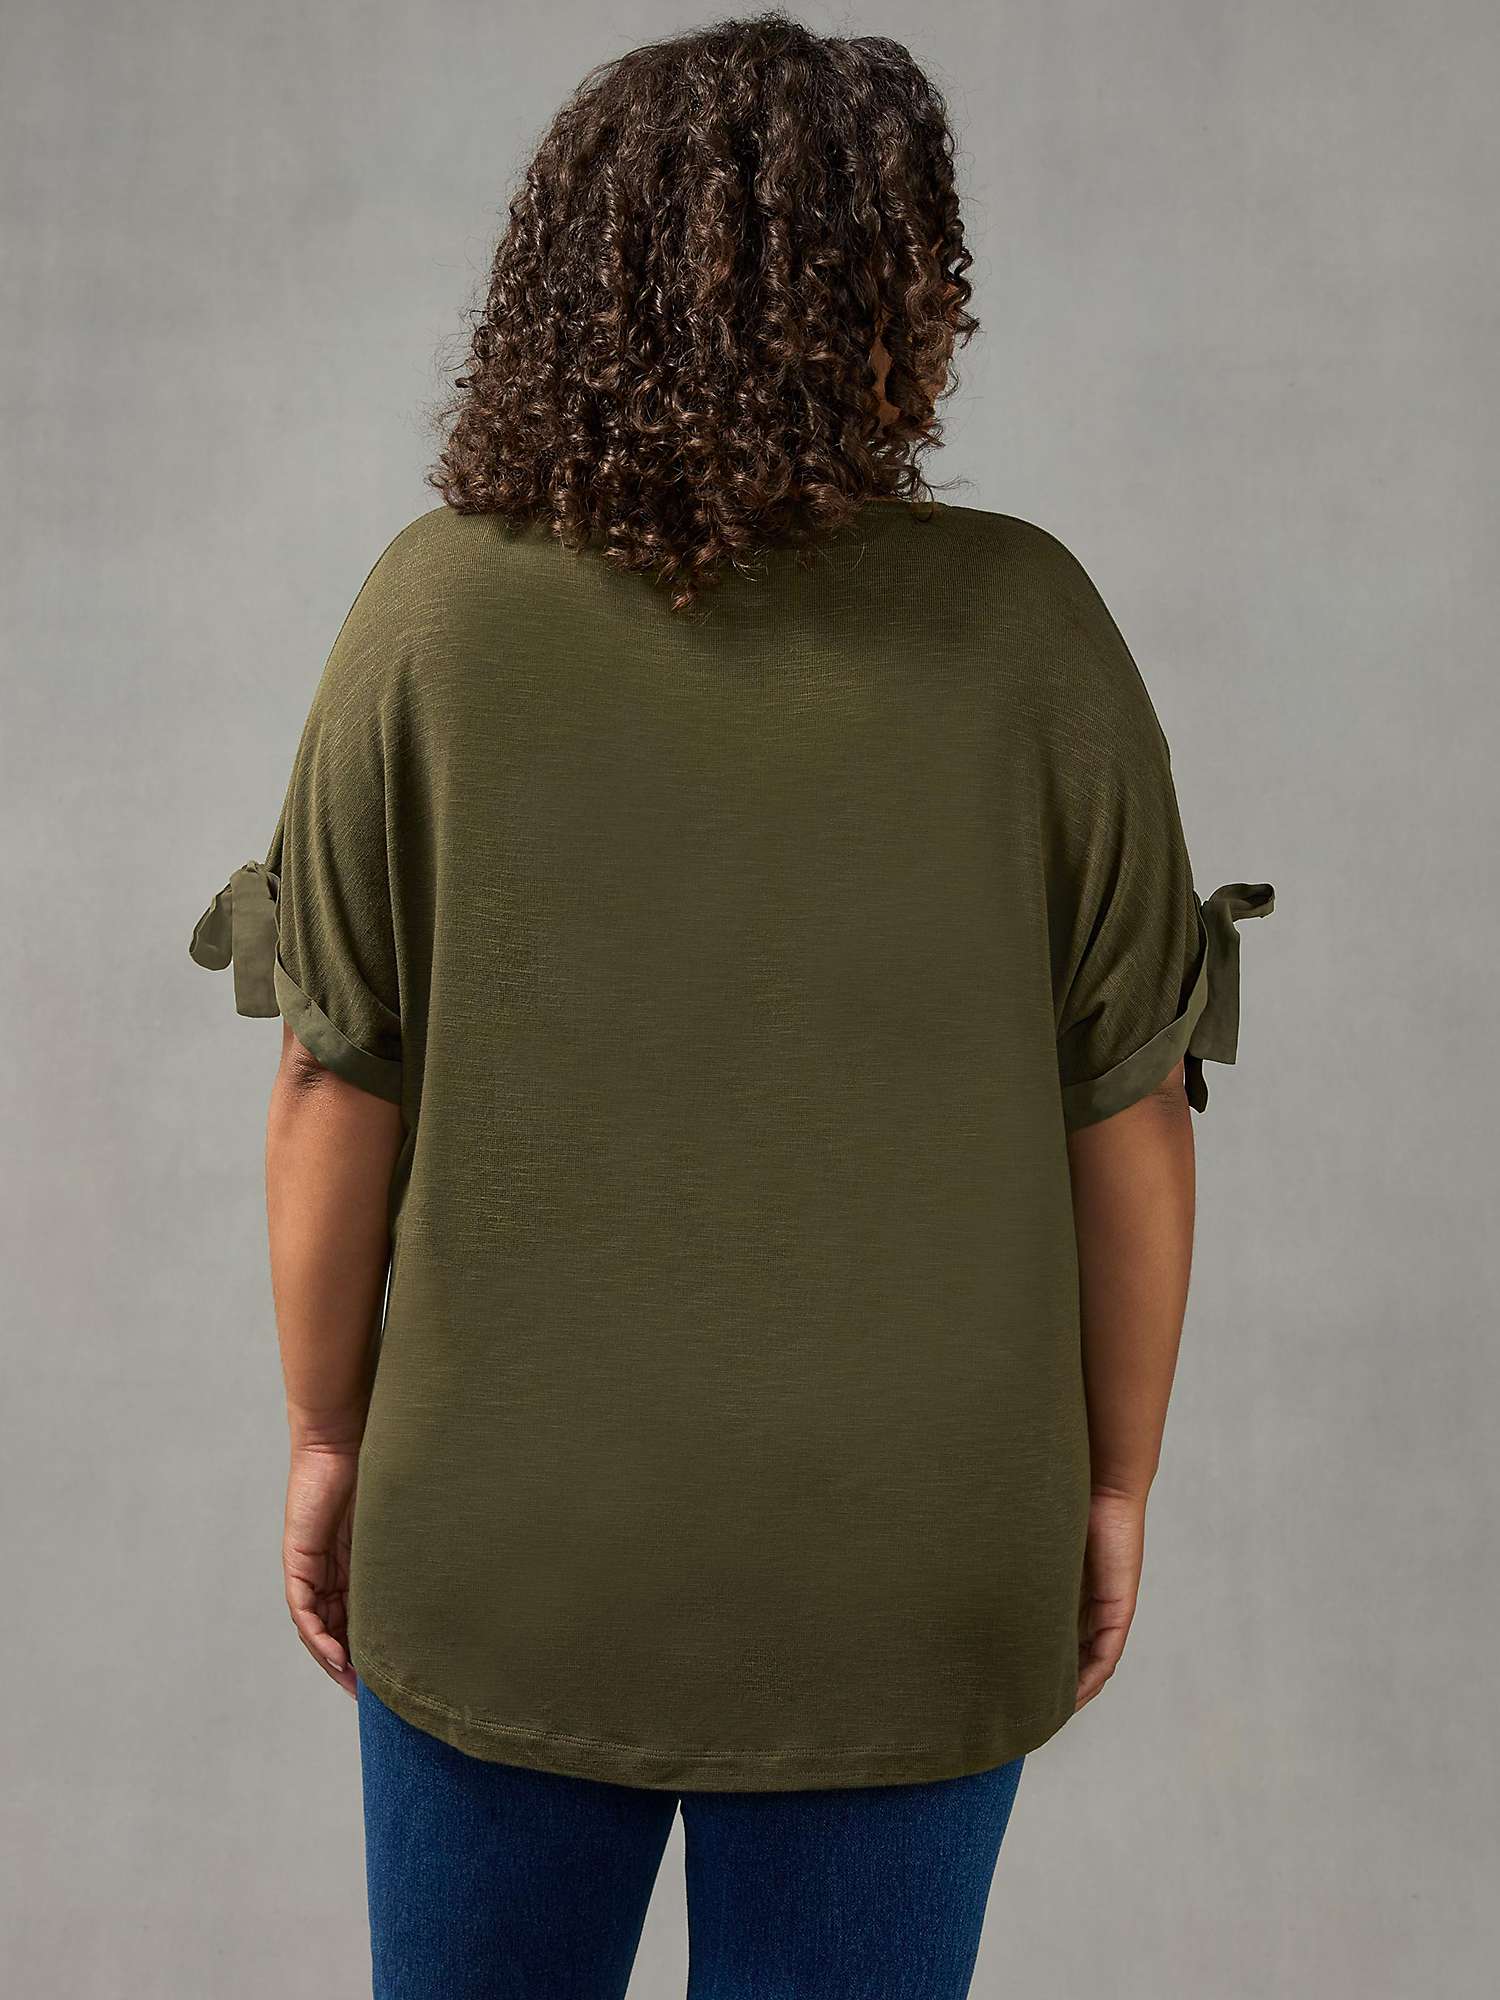 Buy Live Unlimited Curve Tie Sleeve Top Online at johnlewis.com